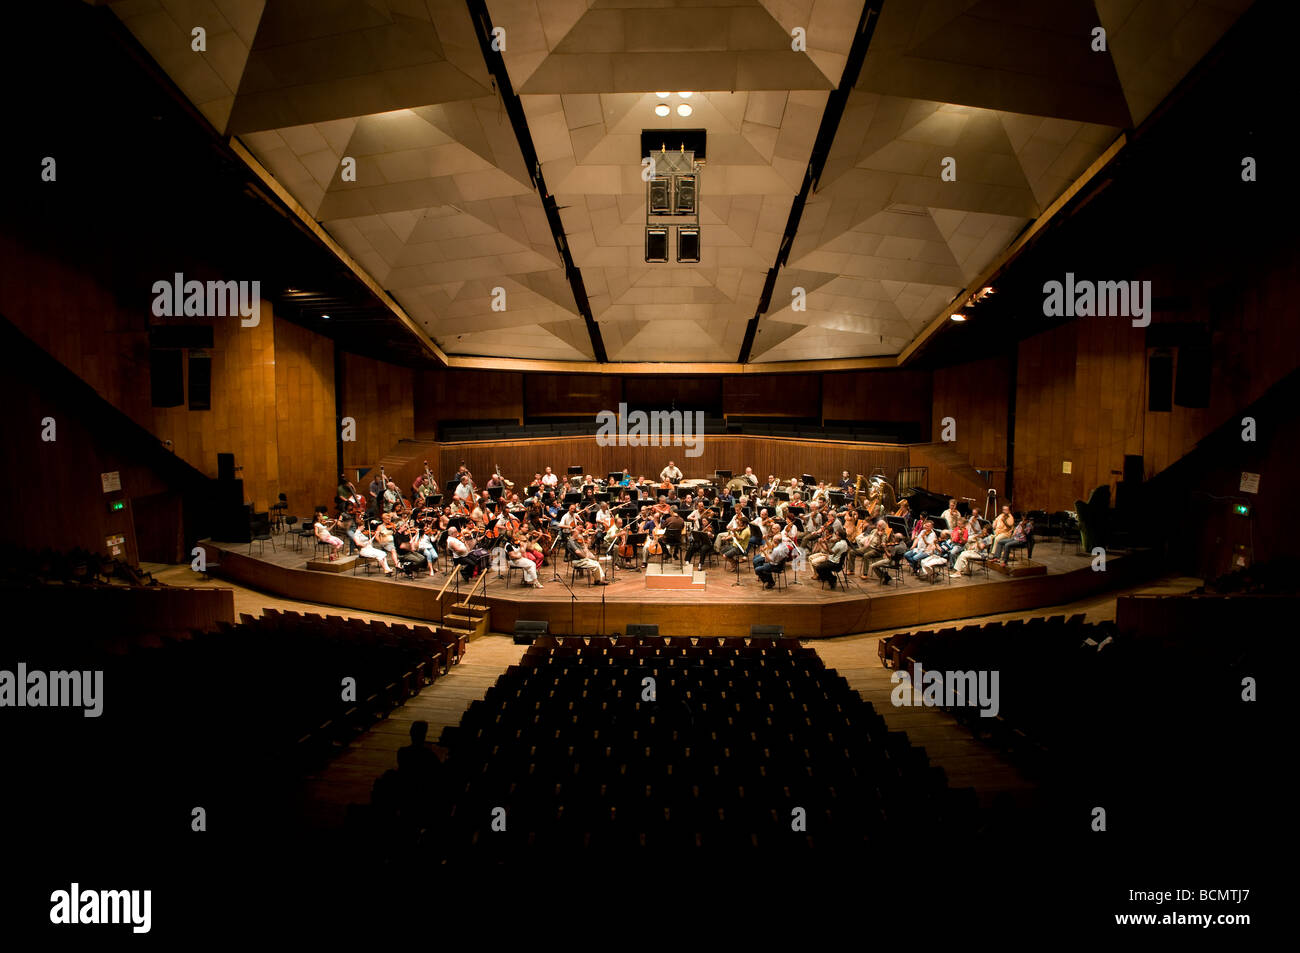 Rehearsal of the Israeli Philharmonic Orchestra in Heichal HaTarbut officially the Charles R Bronfman Auditorium located in central Tel Aviv Israel Stock Photo